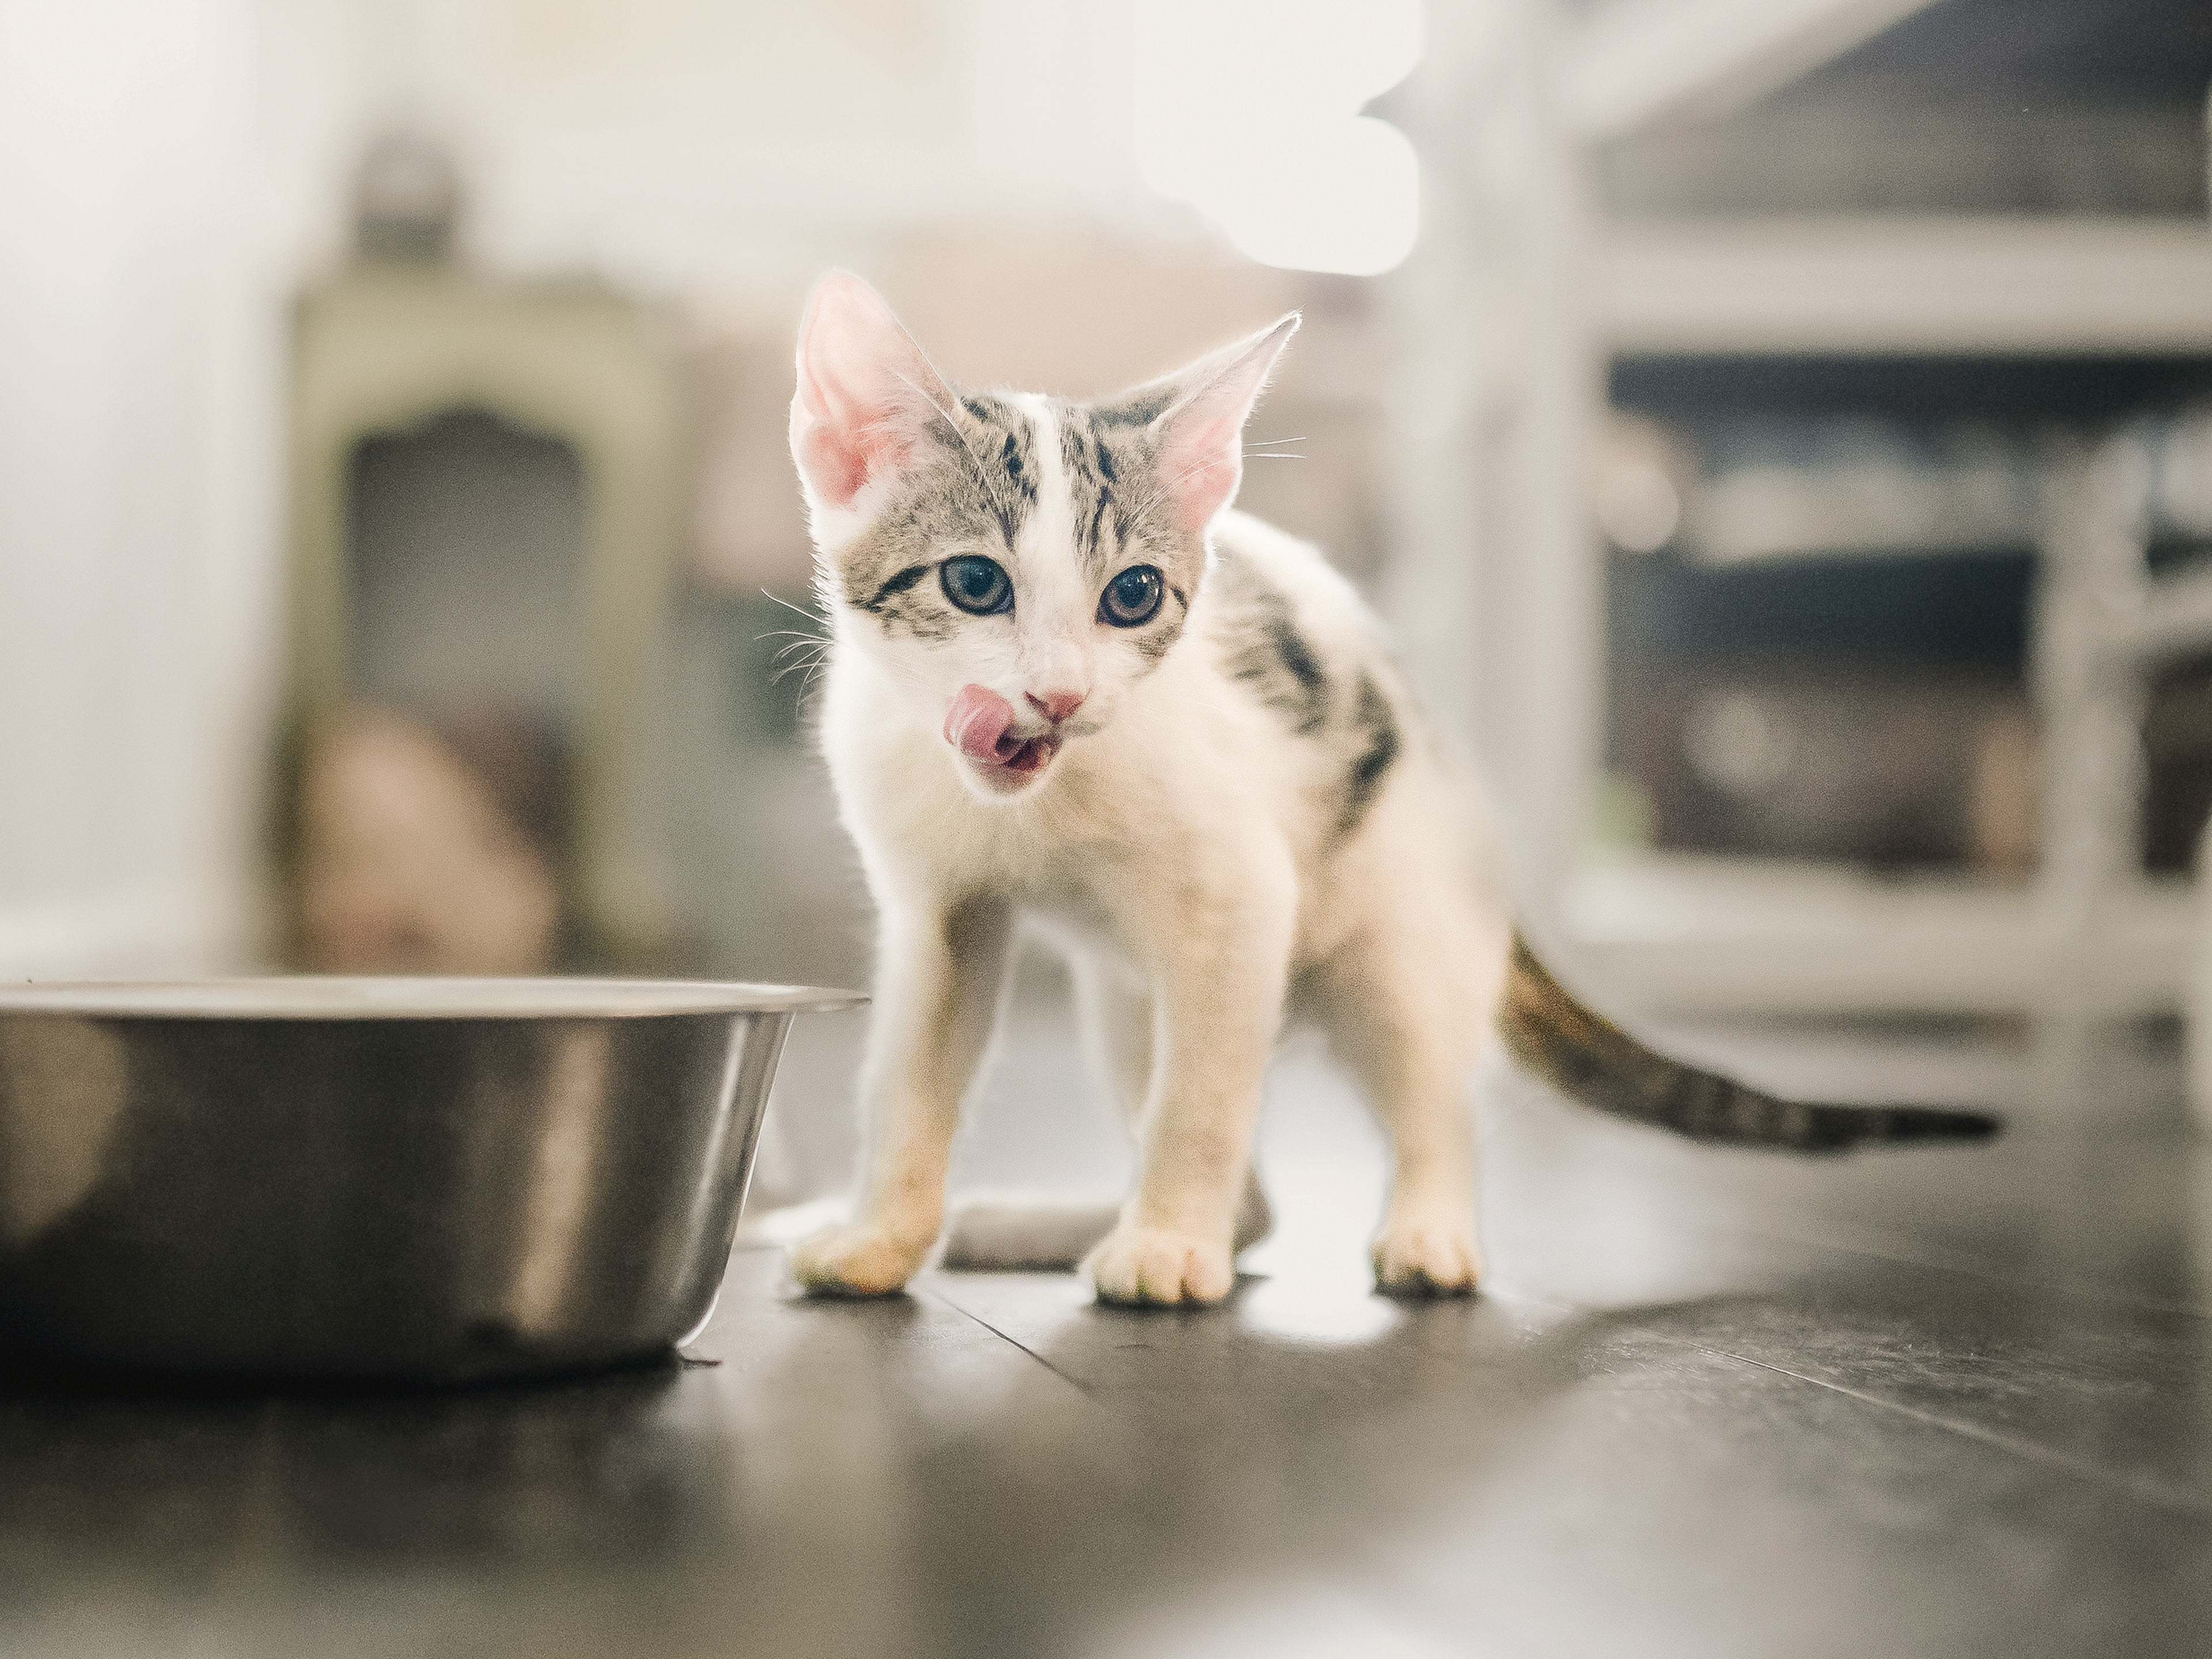 Kitten standing indoors licking its lips next to a stainless steel